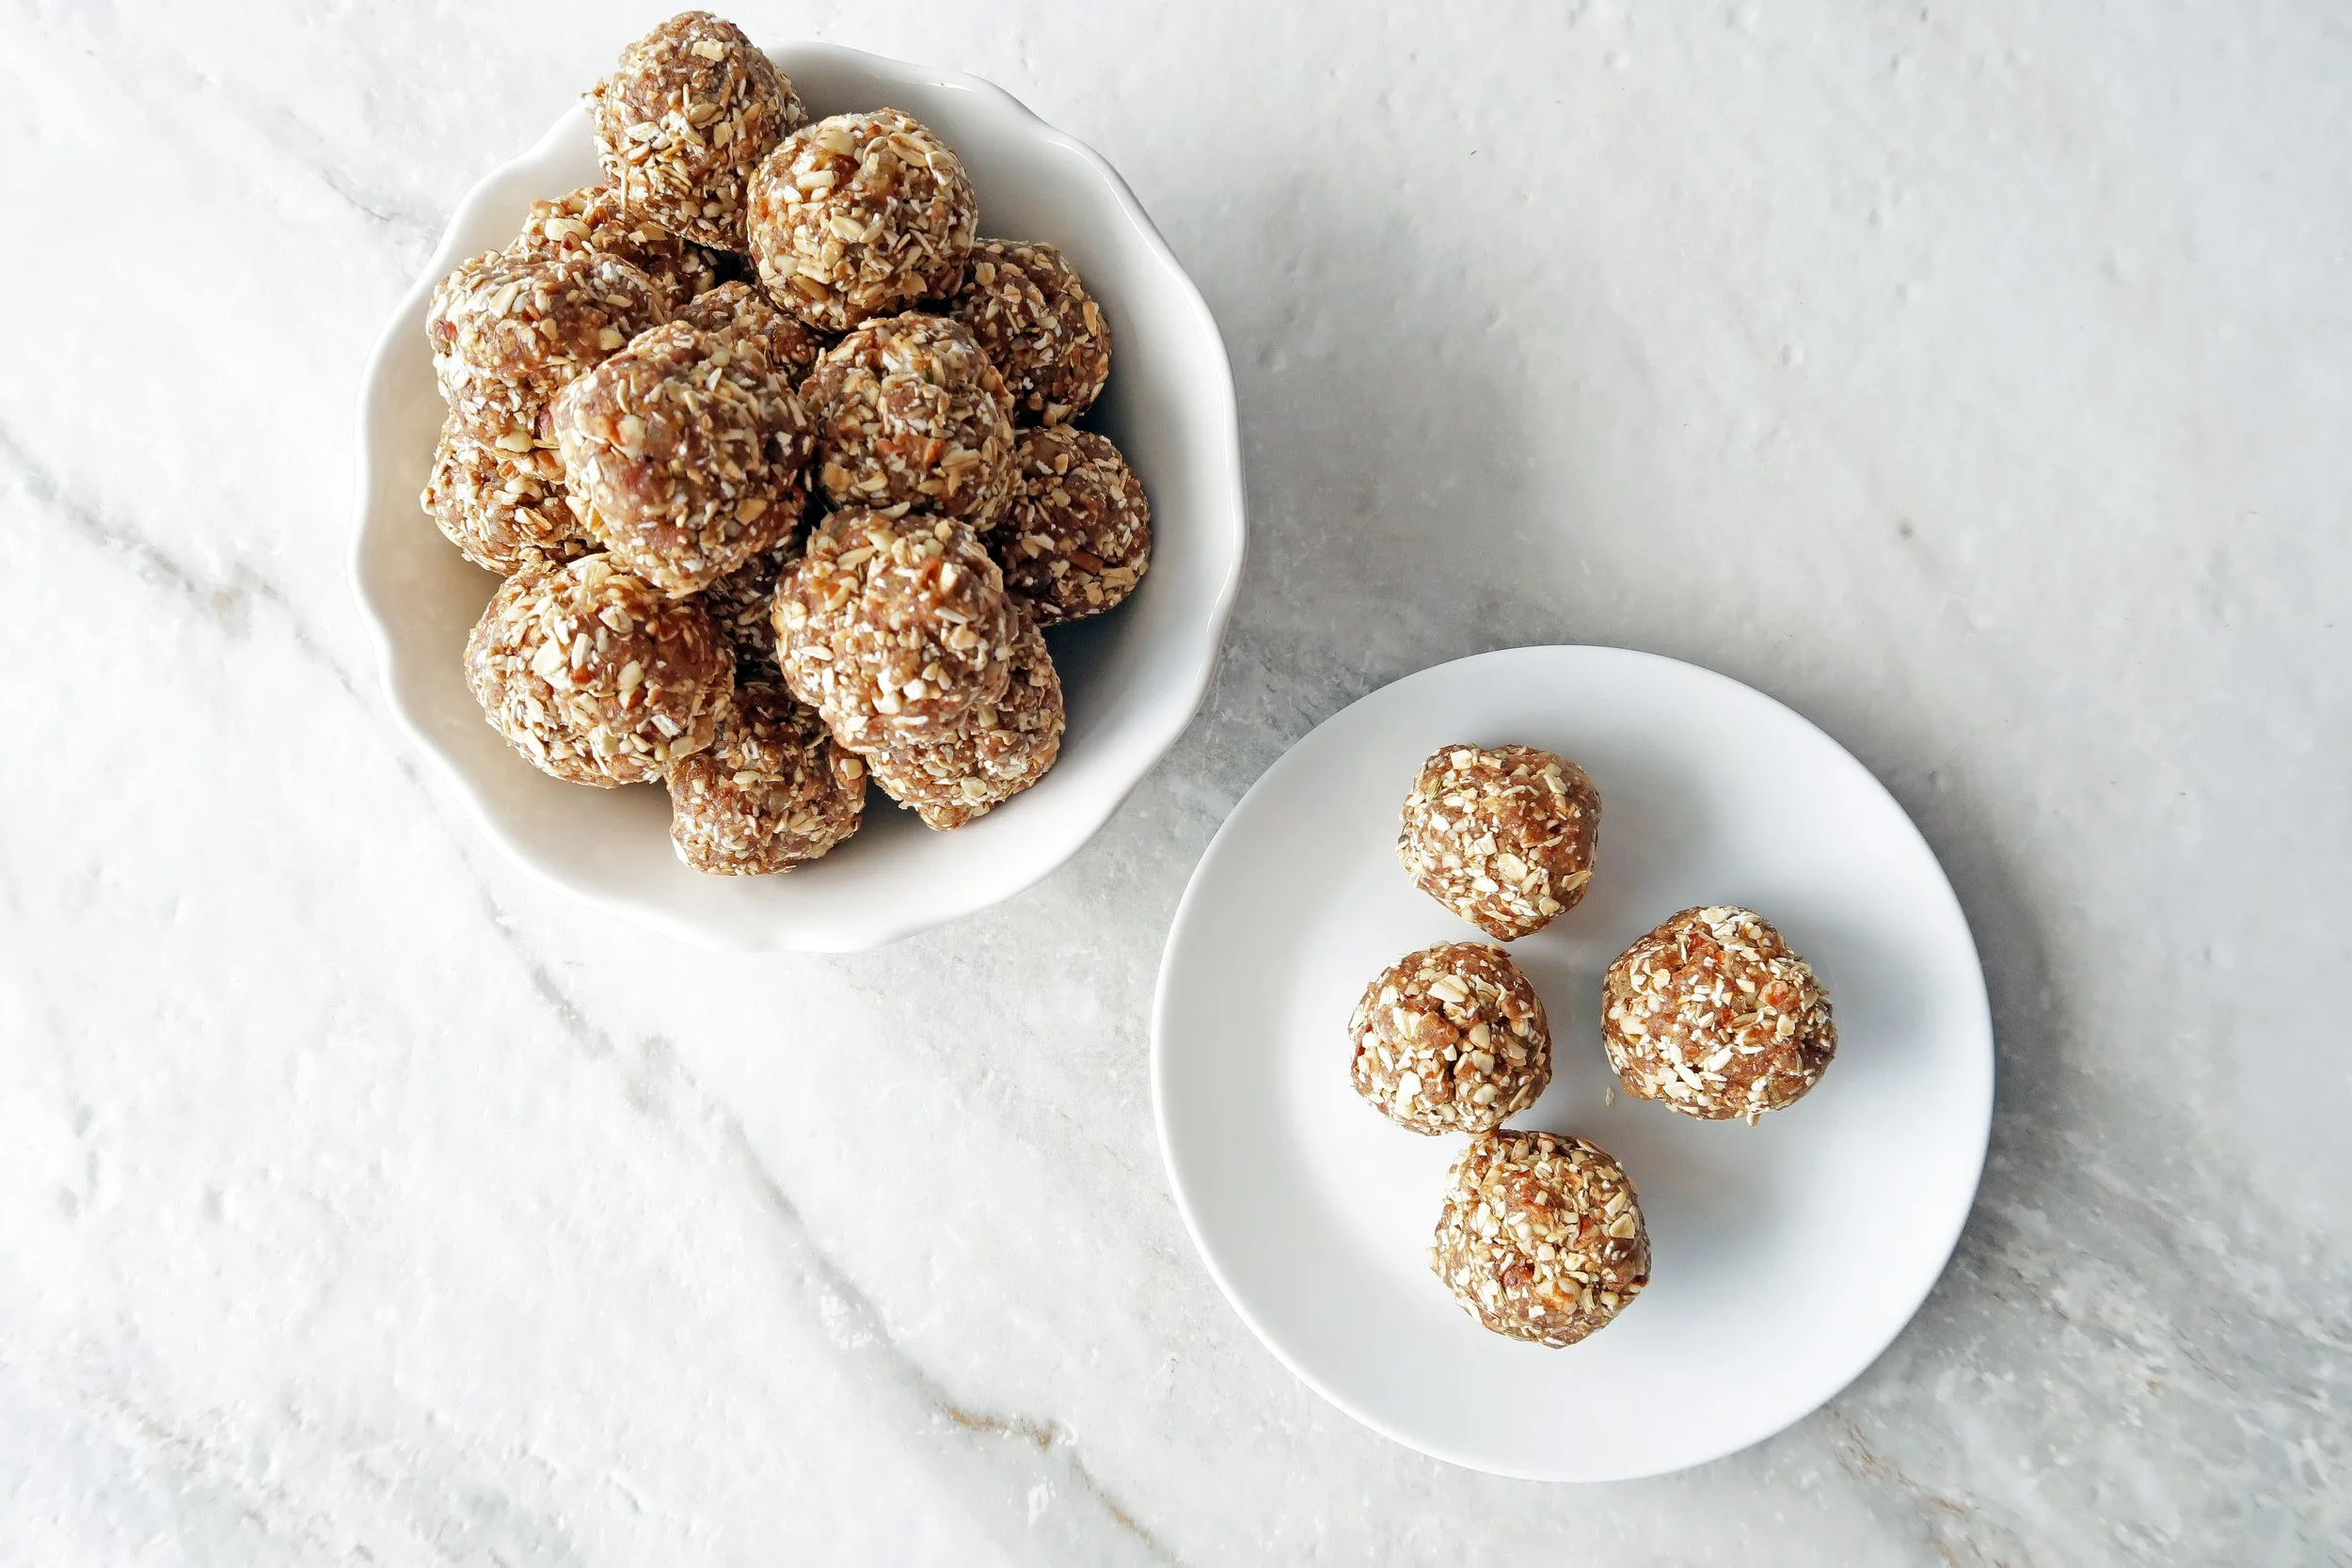 No Bake Chai Spiced Date Energy Balls piled in a white bowl with four energy balls on a white plate to its side.